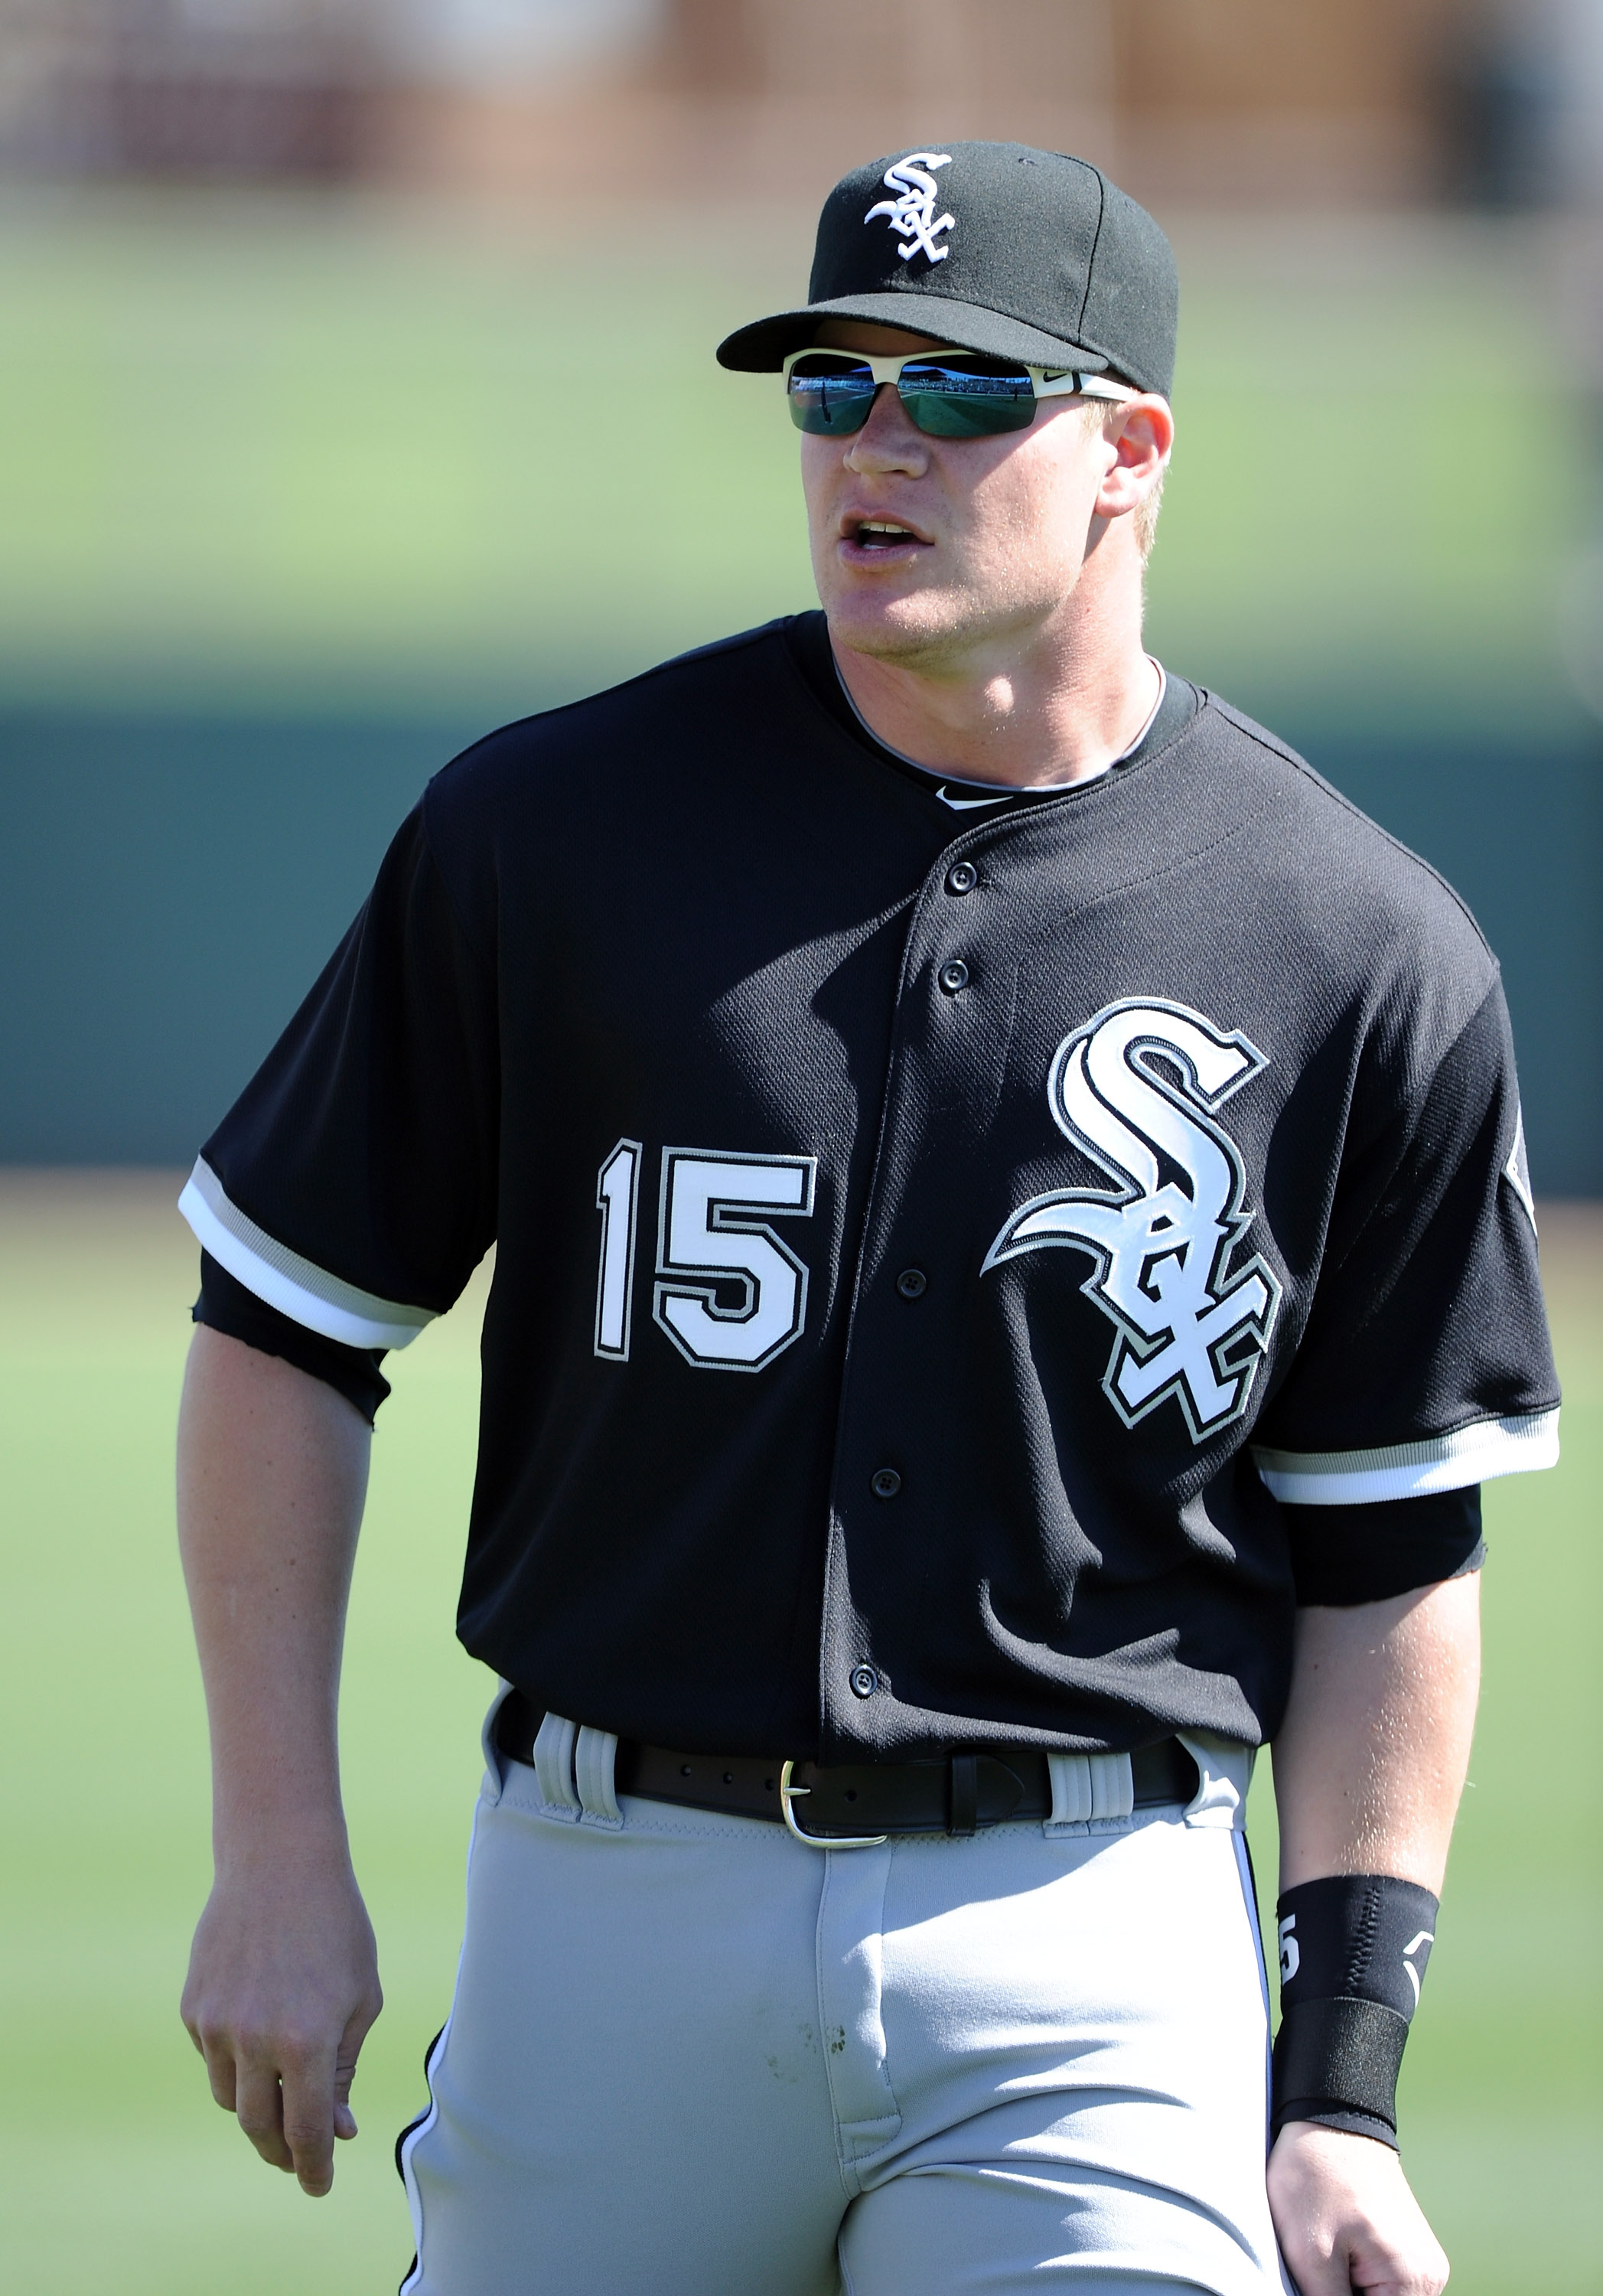 PHOENIX, AZ - FEBRUARY 28:  Gordon Beckham #15 of the Chicago White Sox warms up before the game against the Los Angeles Dodgers during spring training at Camelback Ranch on February 28, 2011 in Phoenix, Arizona.  (Photo by Harry How/Getty Images)